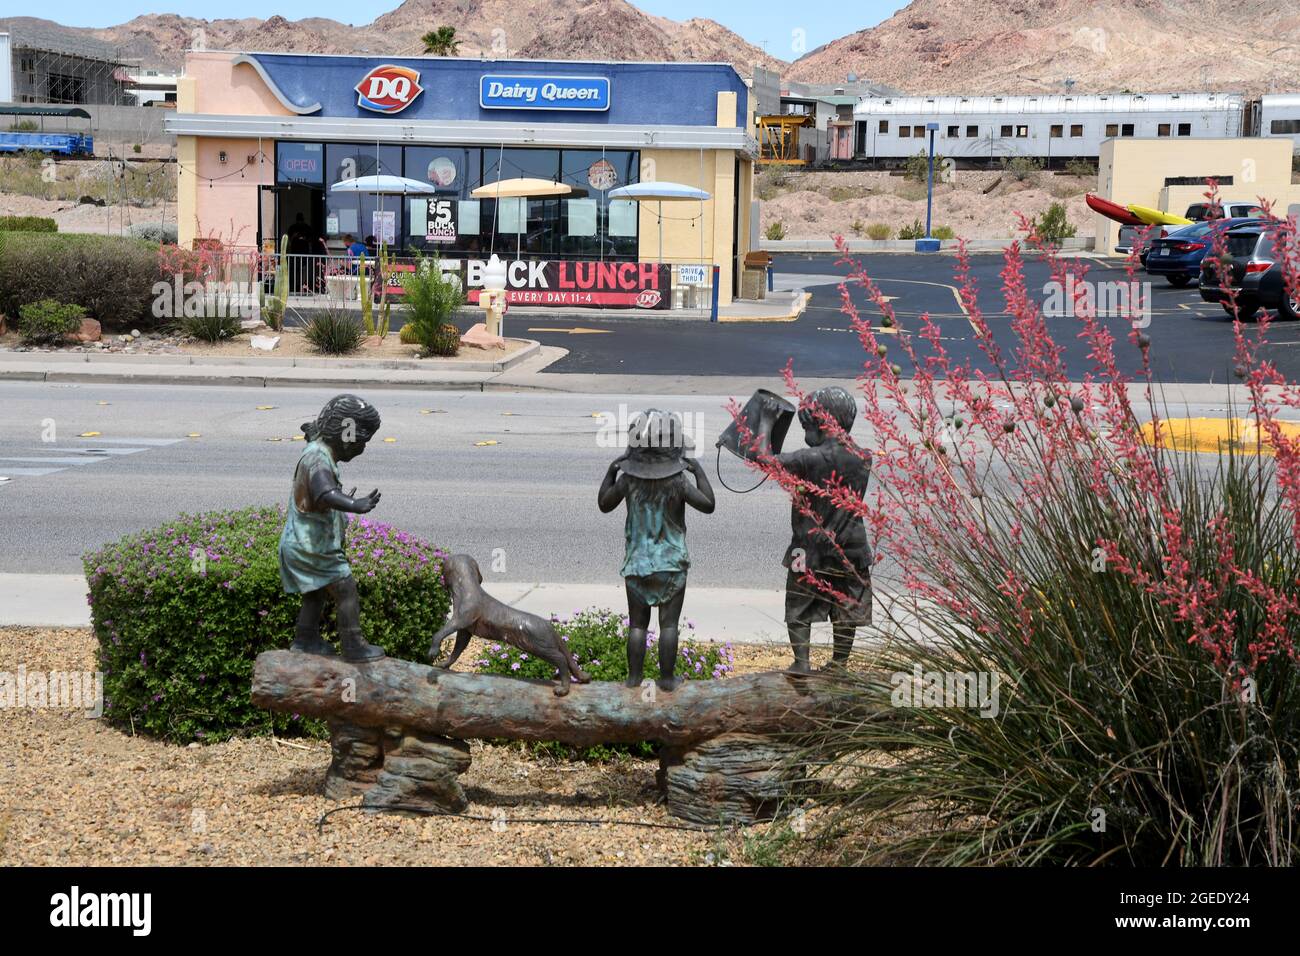 Boulder city/Nevada/USA/ 30 May 2018-Daily life in boulder city business nd  tourists life Founded in 1931 Boulder City was established for the workers  building Dam,later named Hoover Dam.Located just 5 miles from